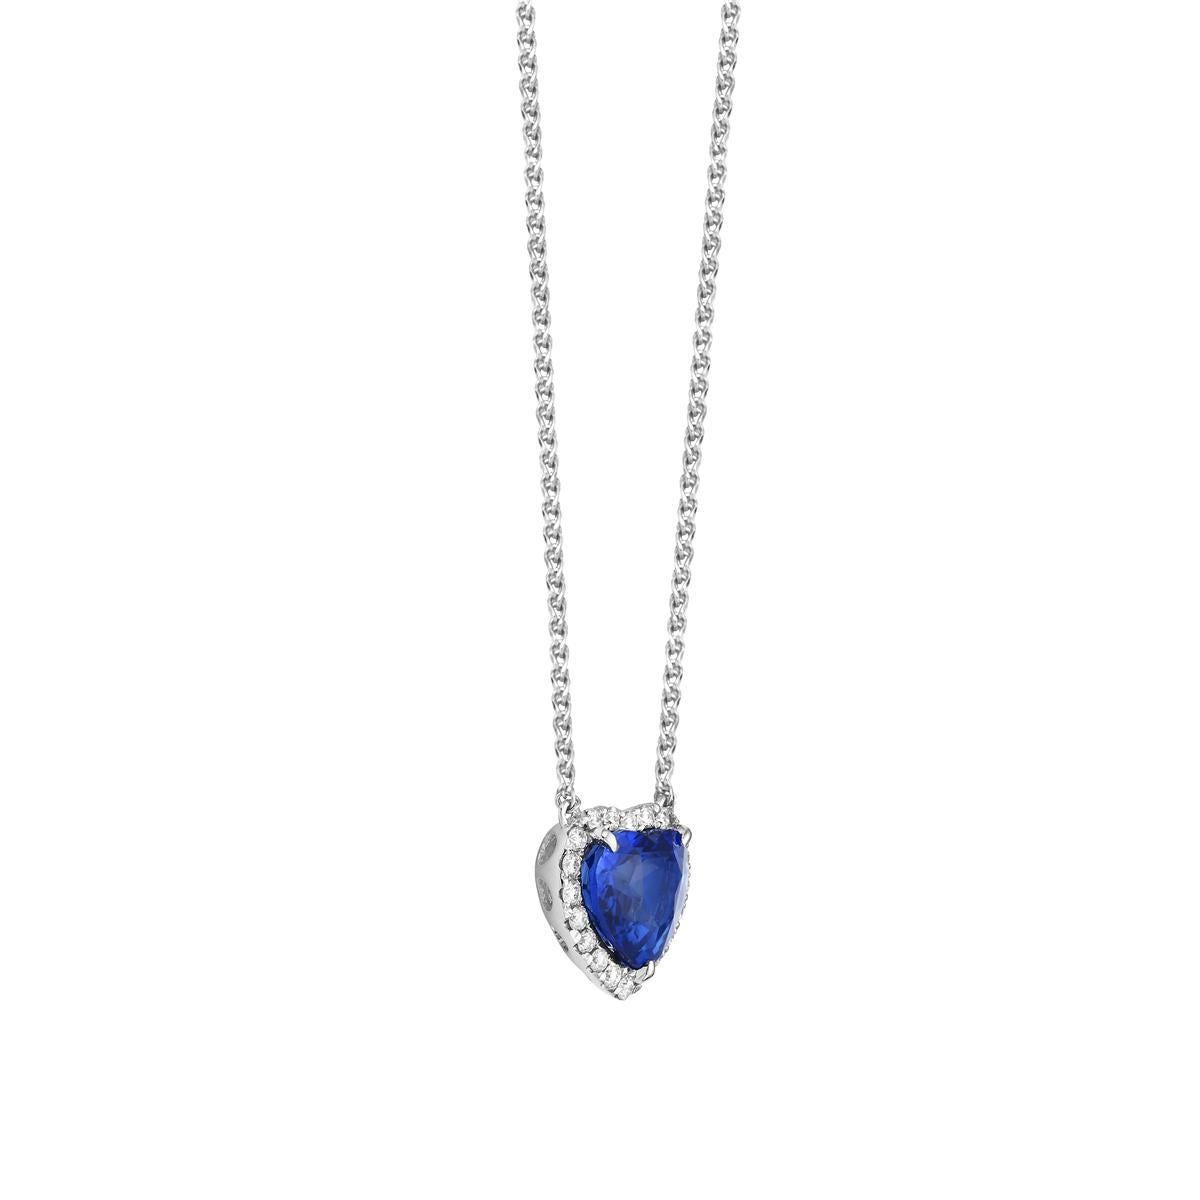 With this diamond and sapphire heart-shaped pendant, style and glamour are in the spotlight. This 18-karat diamond and sapphire heart-shaped pendant is made from 1.3 grams of gold. This pendant is adorned with VS2, G color diamonds, made out of 20